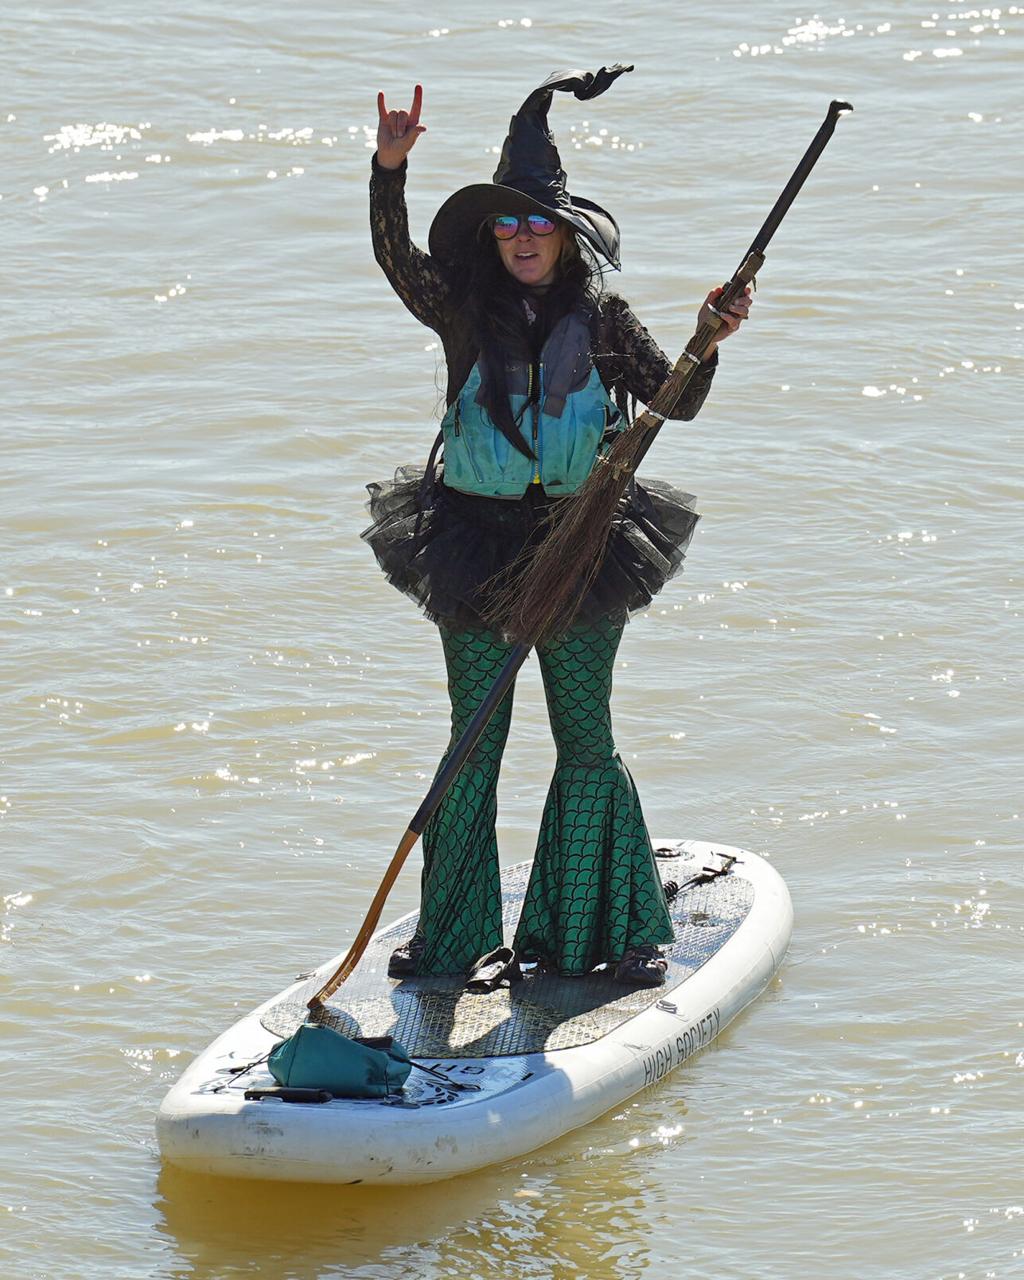 Paddle Boarders in Witch Costumes Welcome Halloween - The New York Times